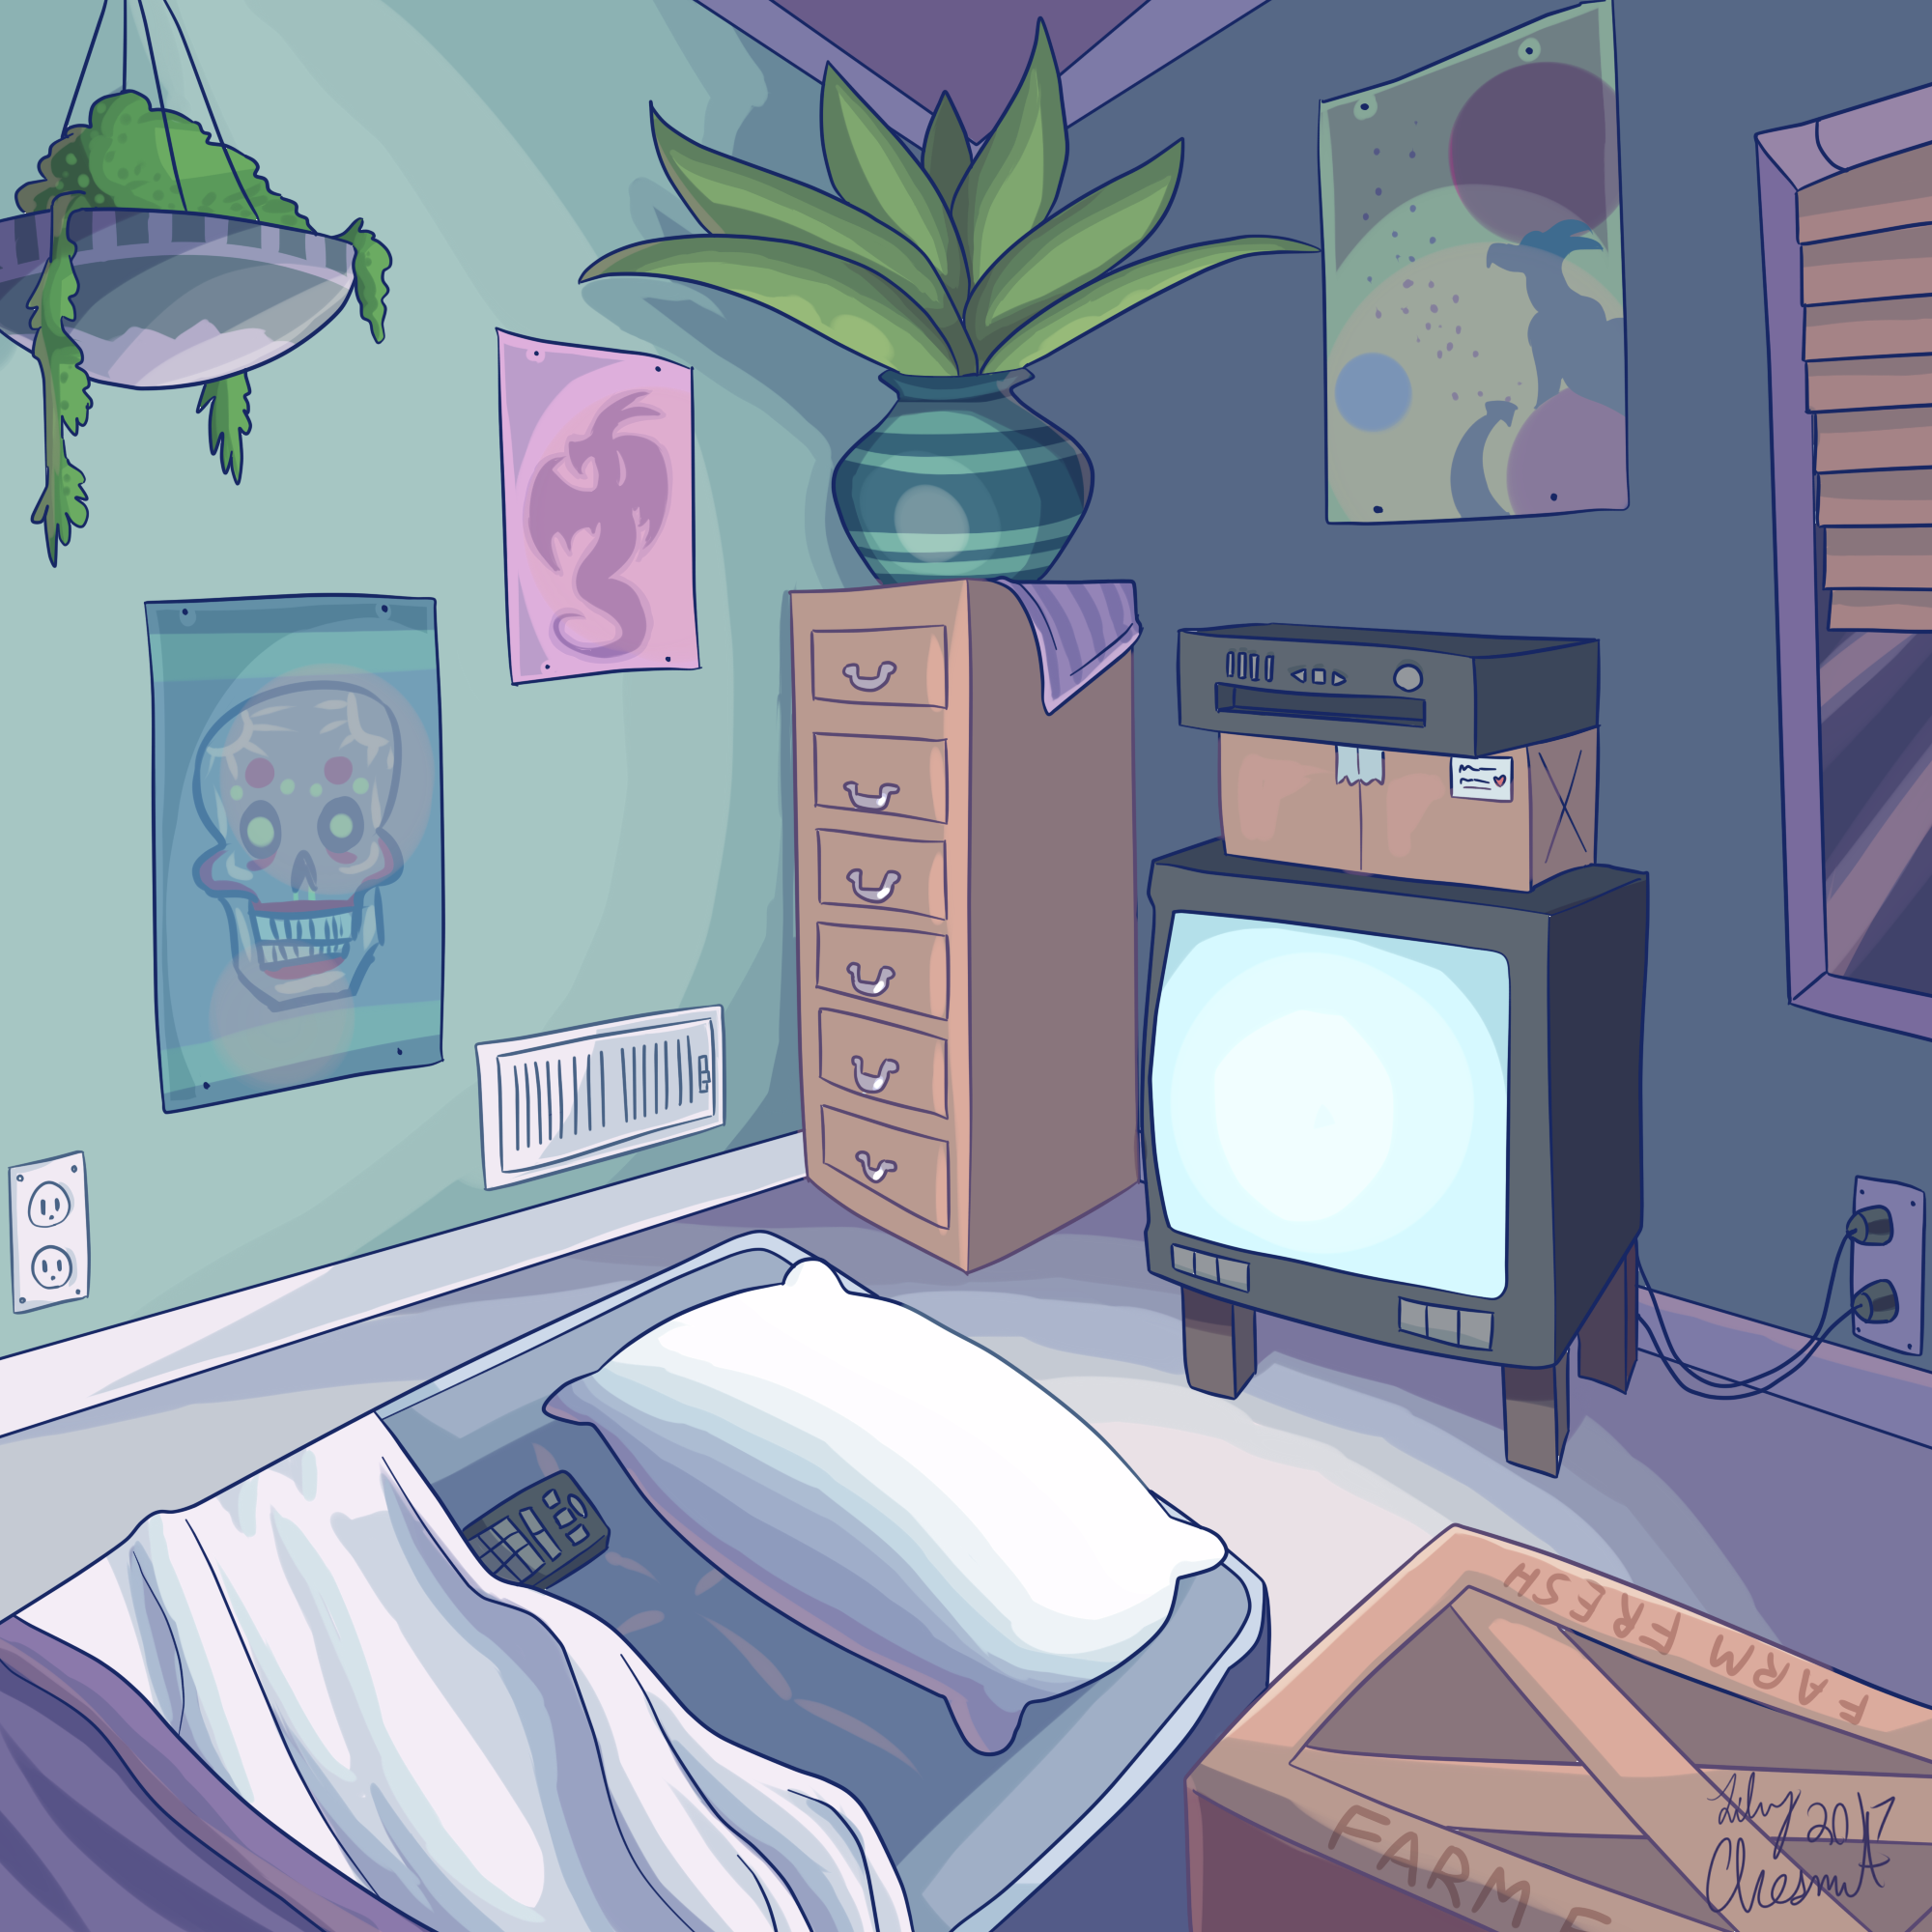 Cozy Room (Environment Practice) by BiccaBiccaTree on DeviantArt